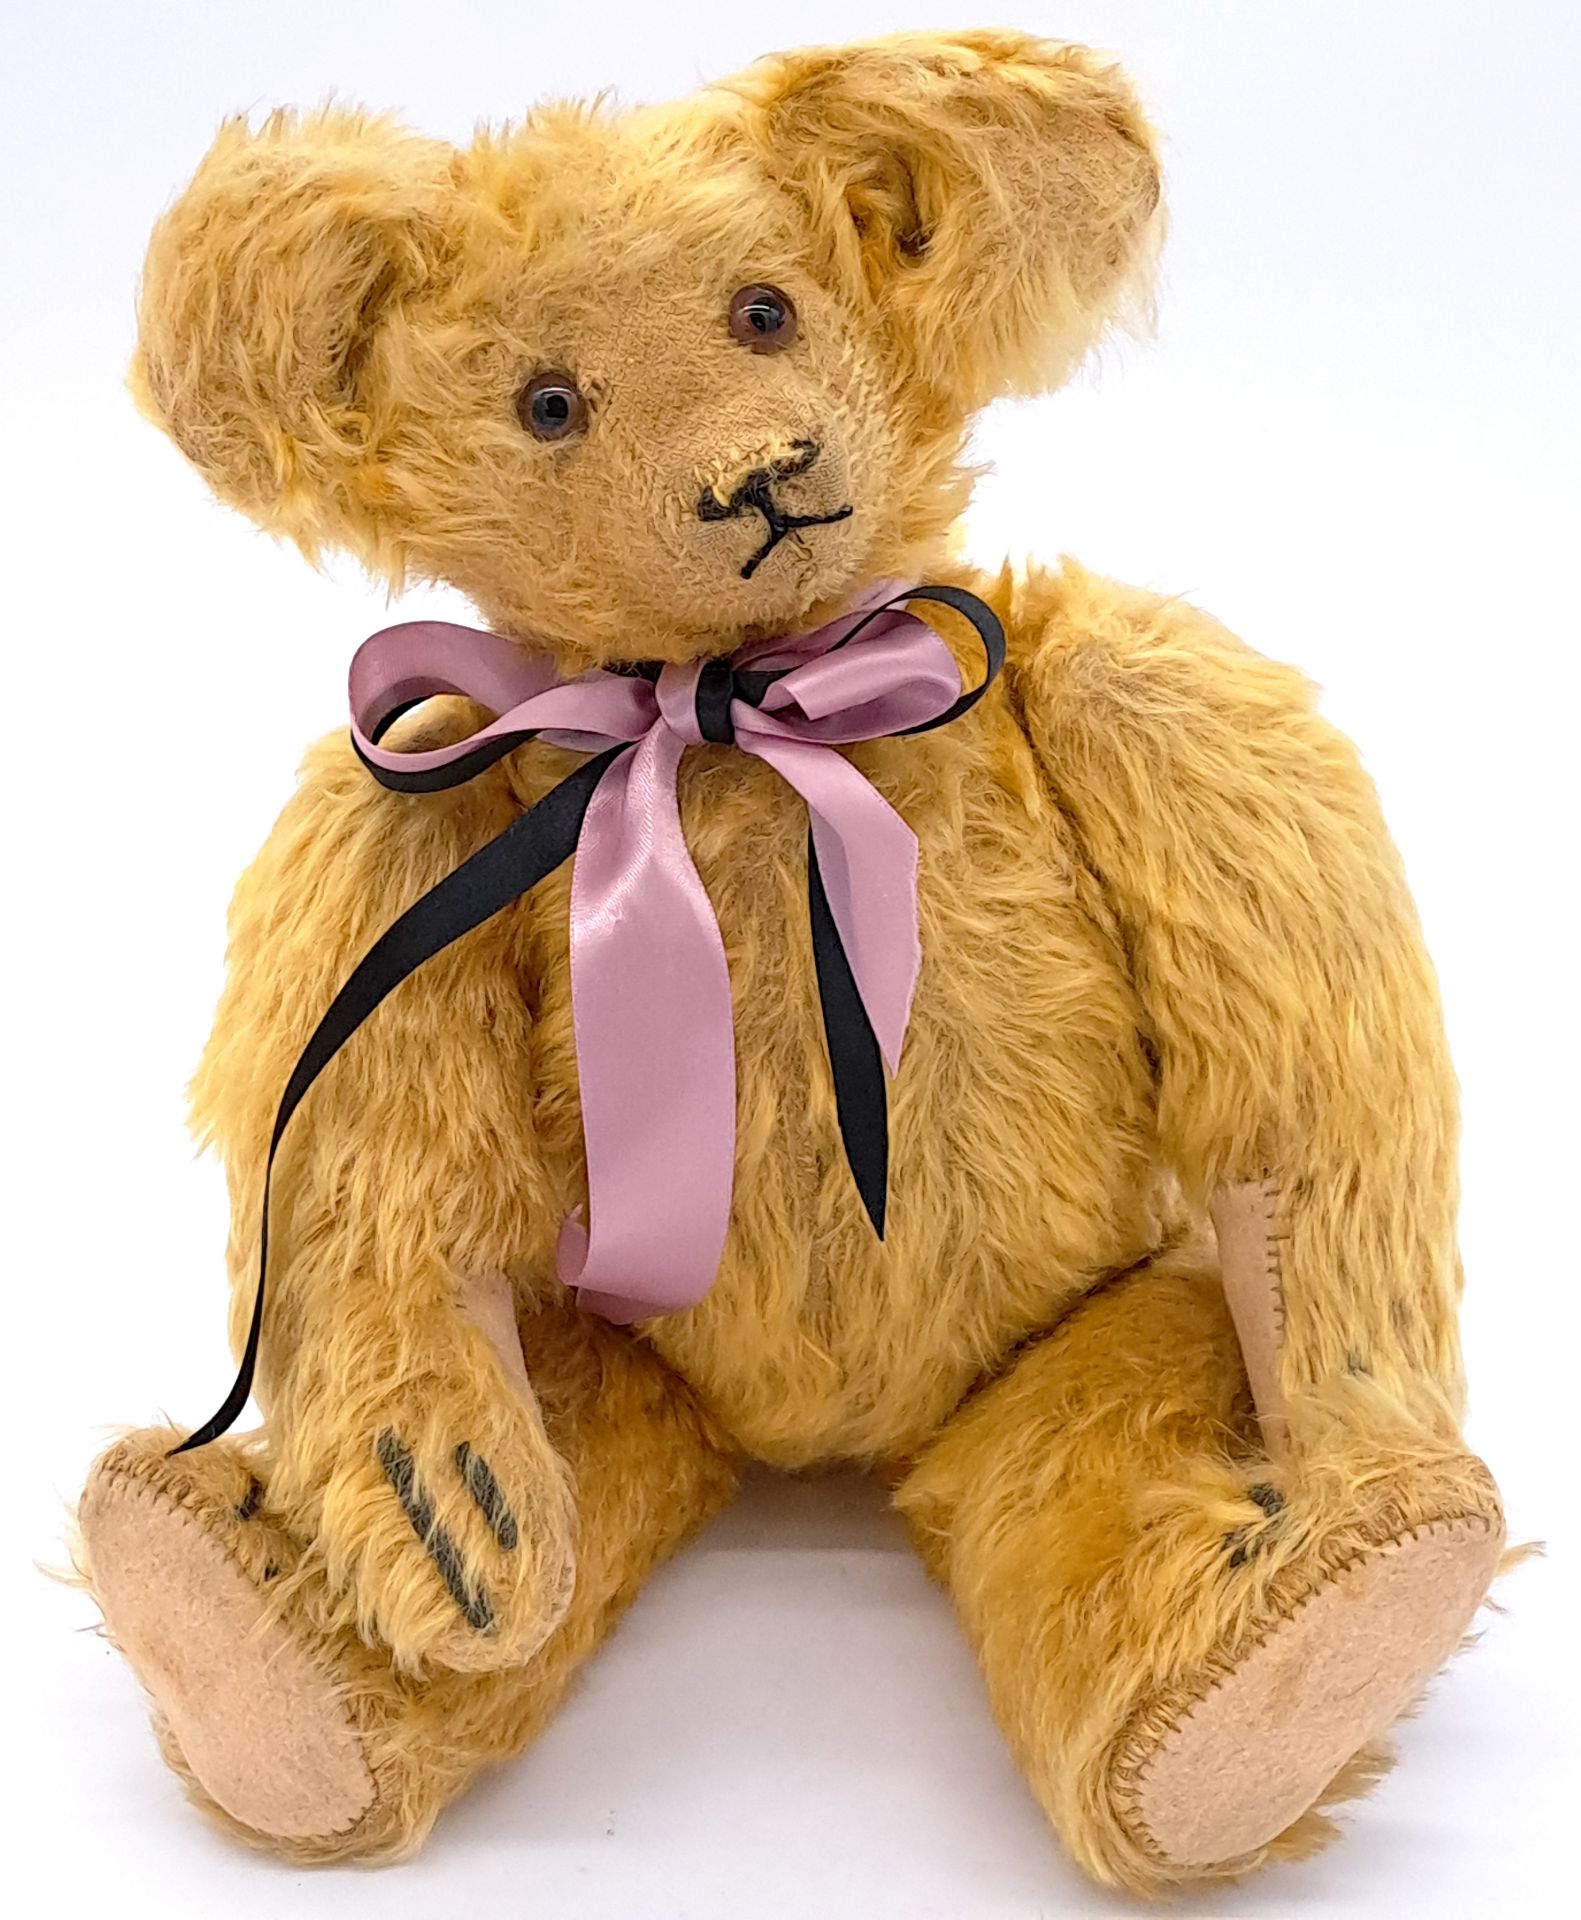 National French and Novelty Co rare antique teddy bear